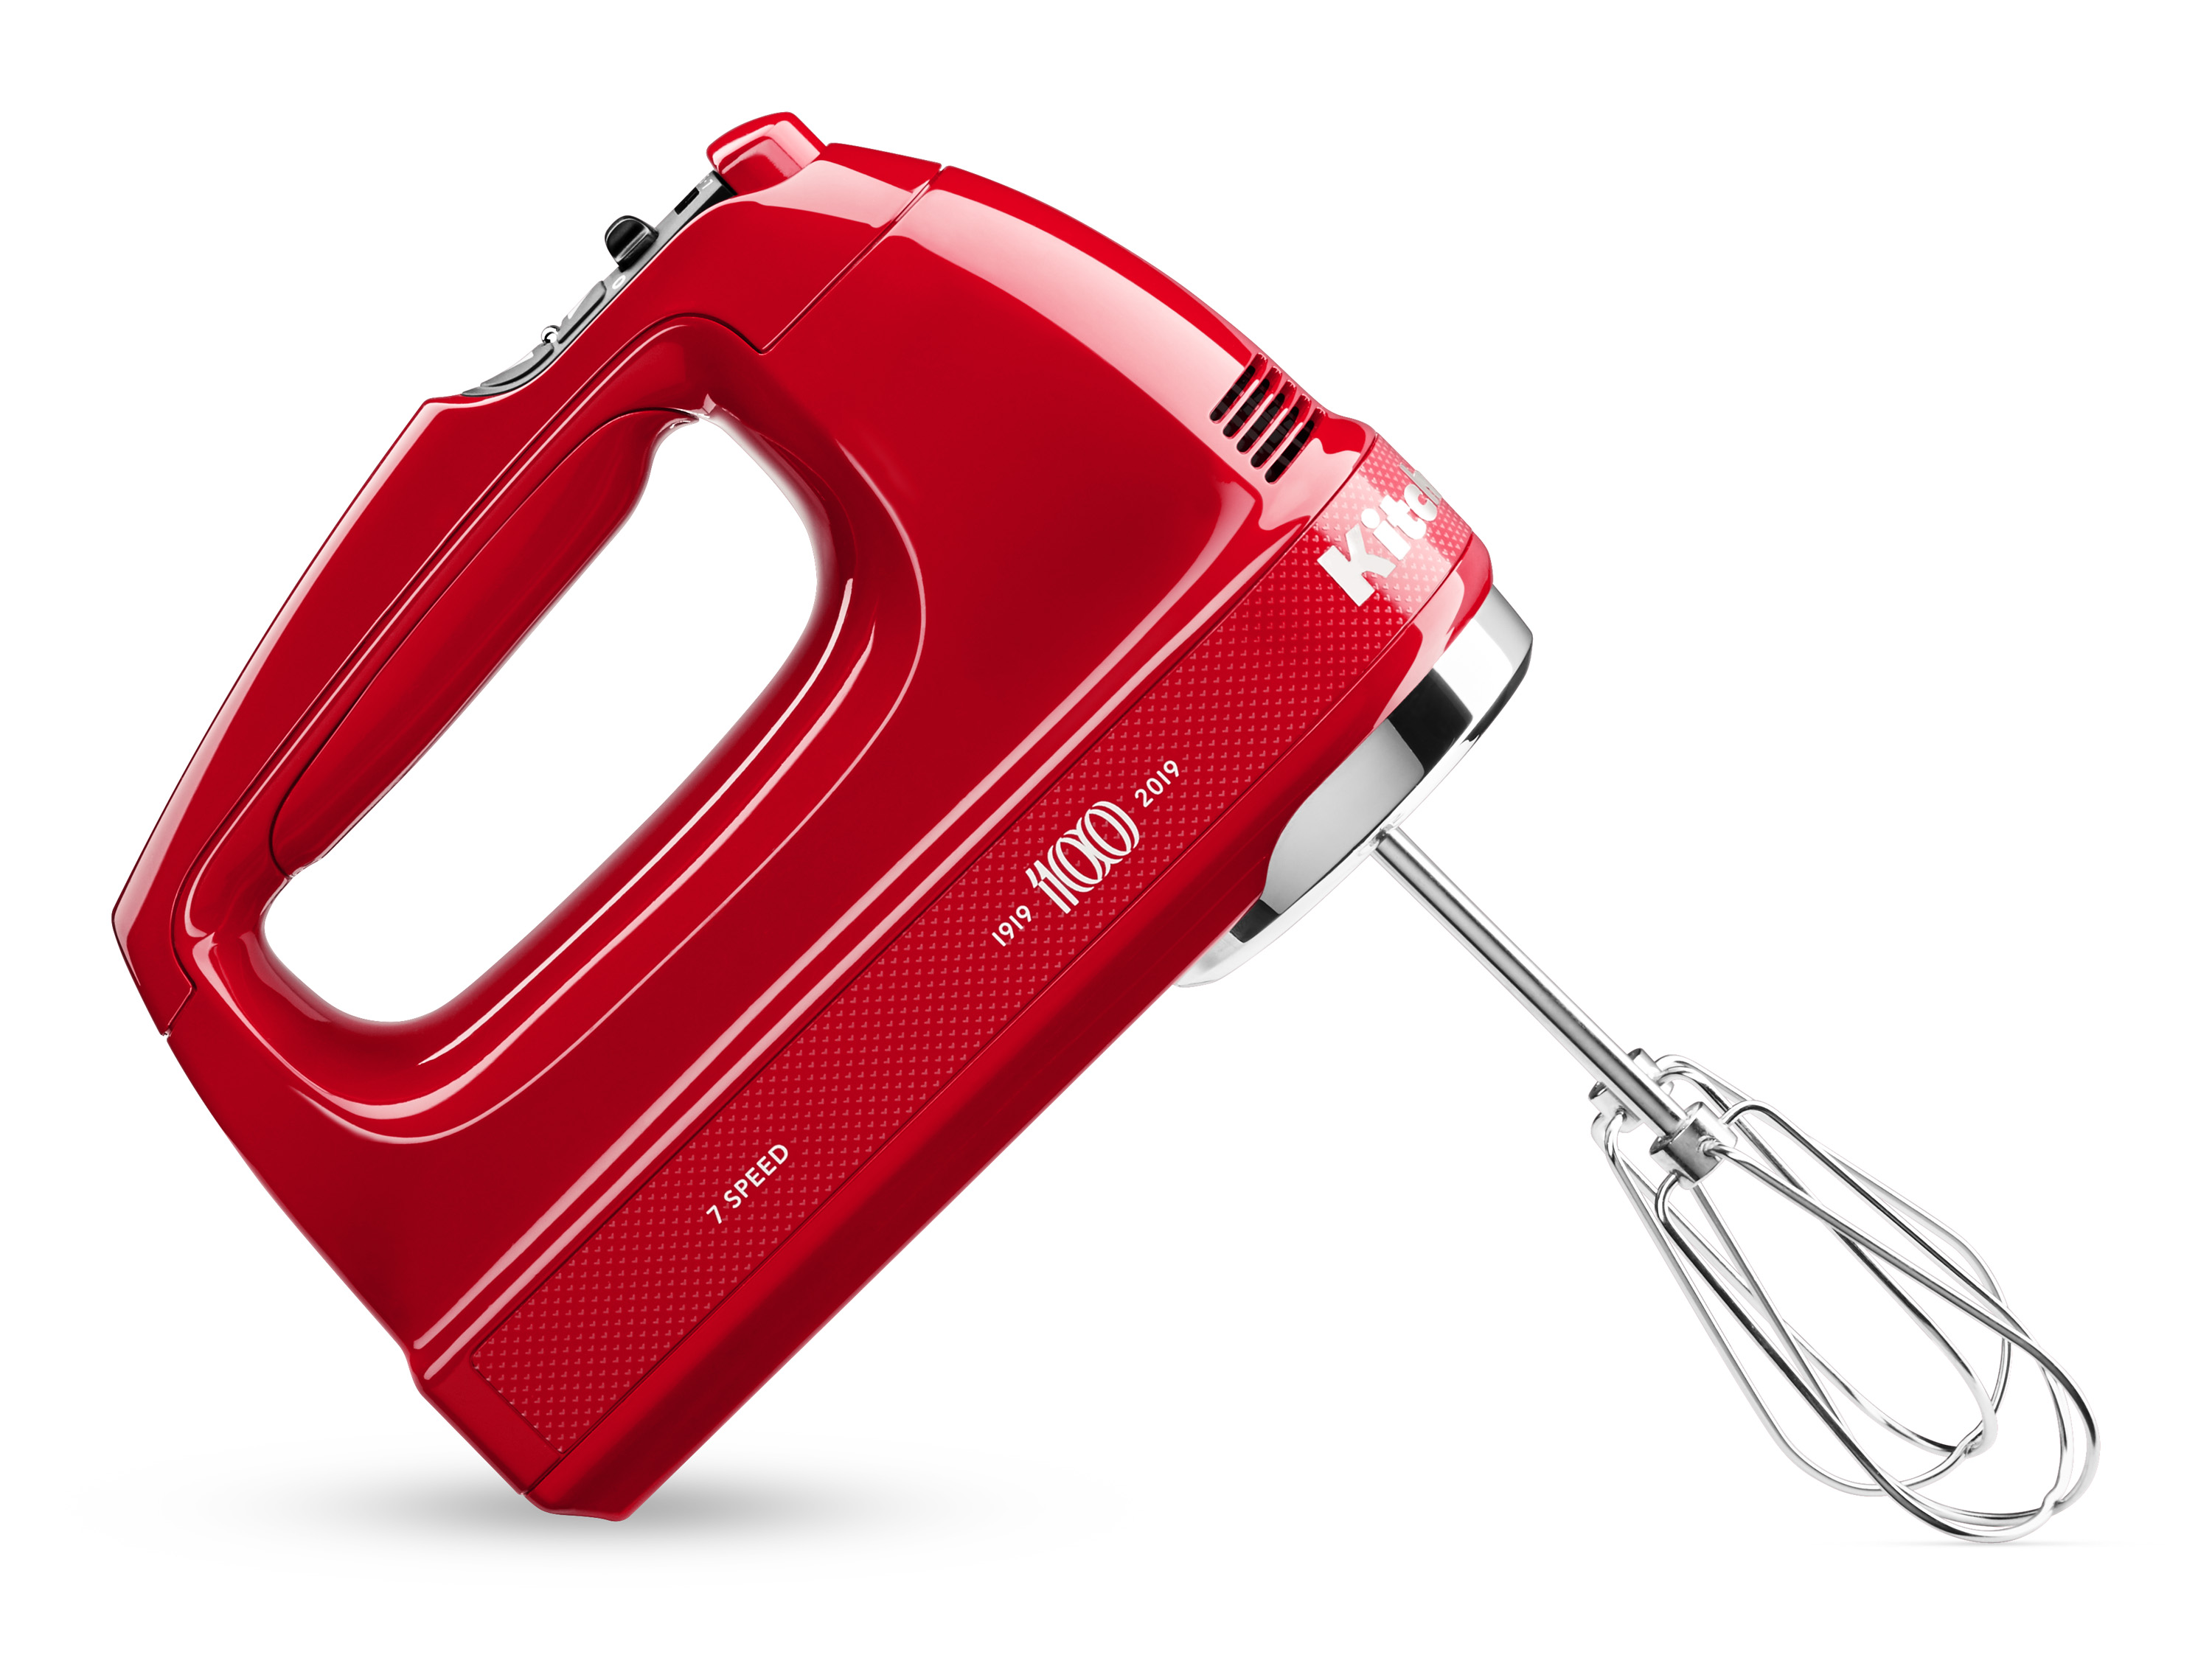 KitchenAid celebrates 100 years with Passion Red Queen of Hearts collection  - CNET